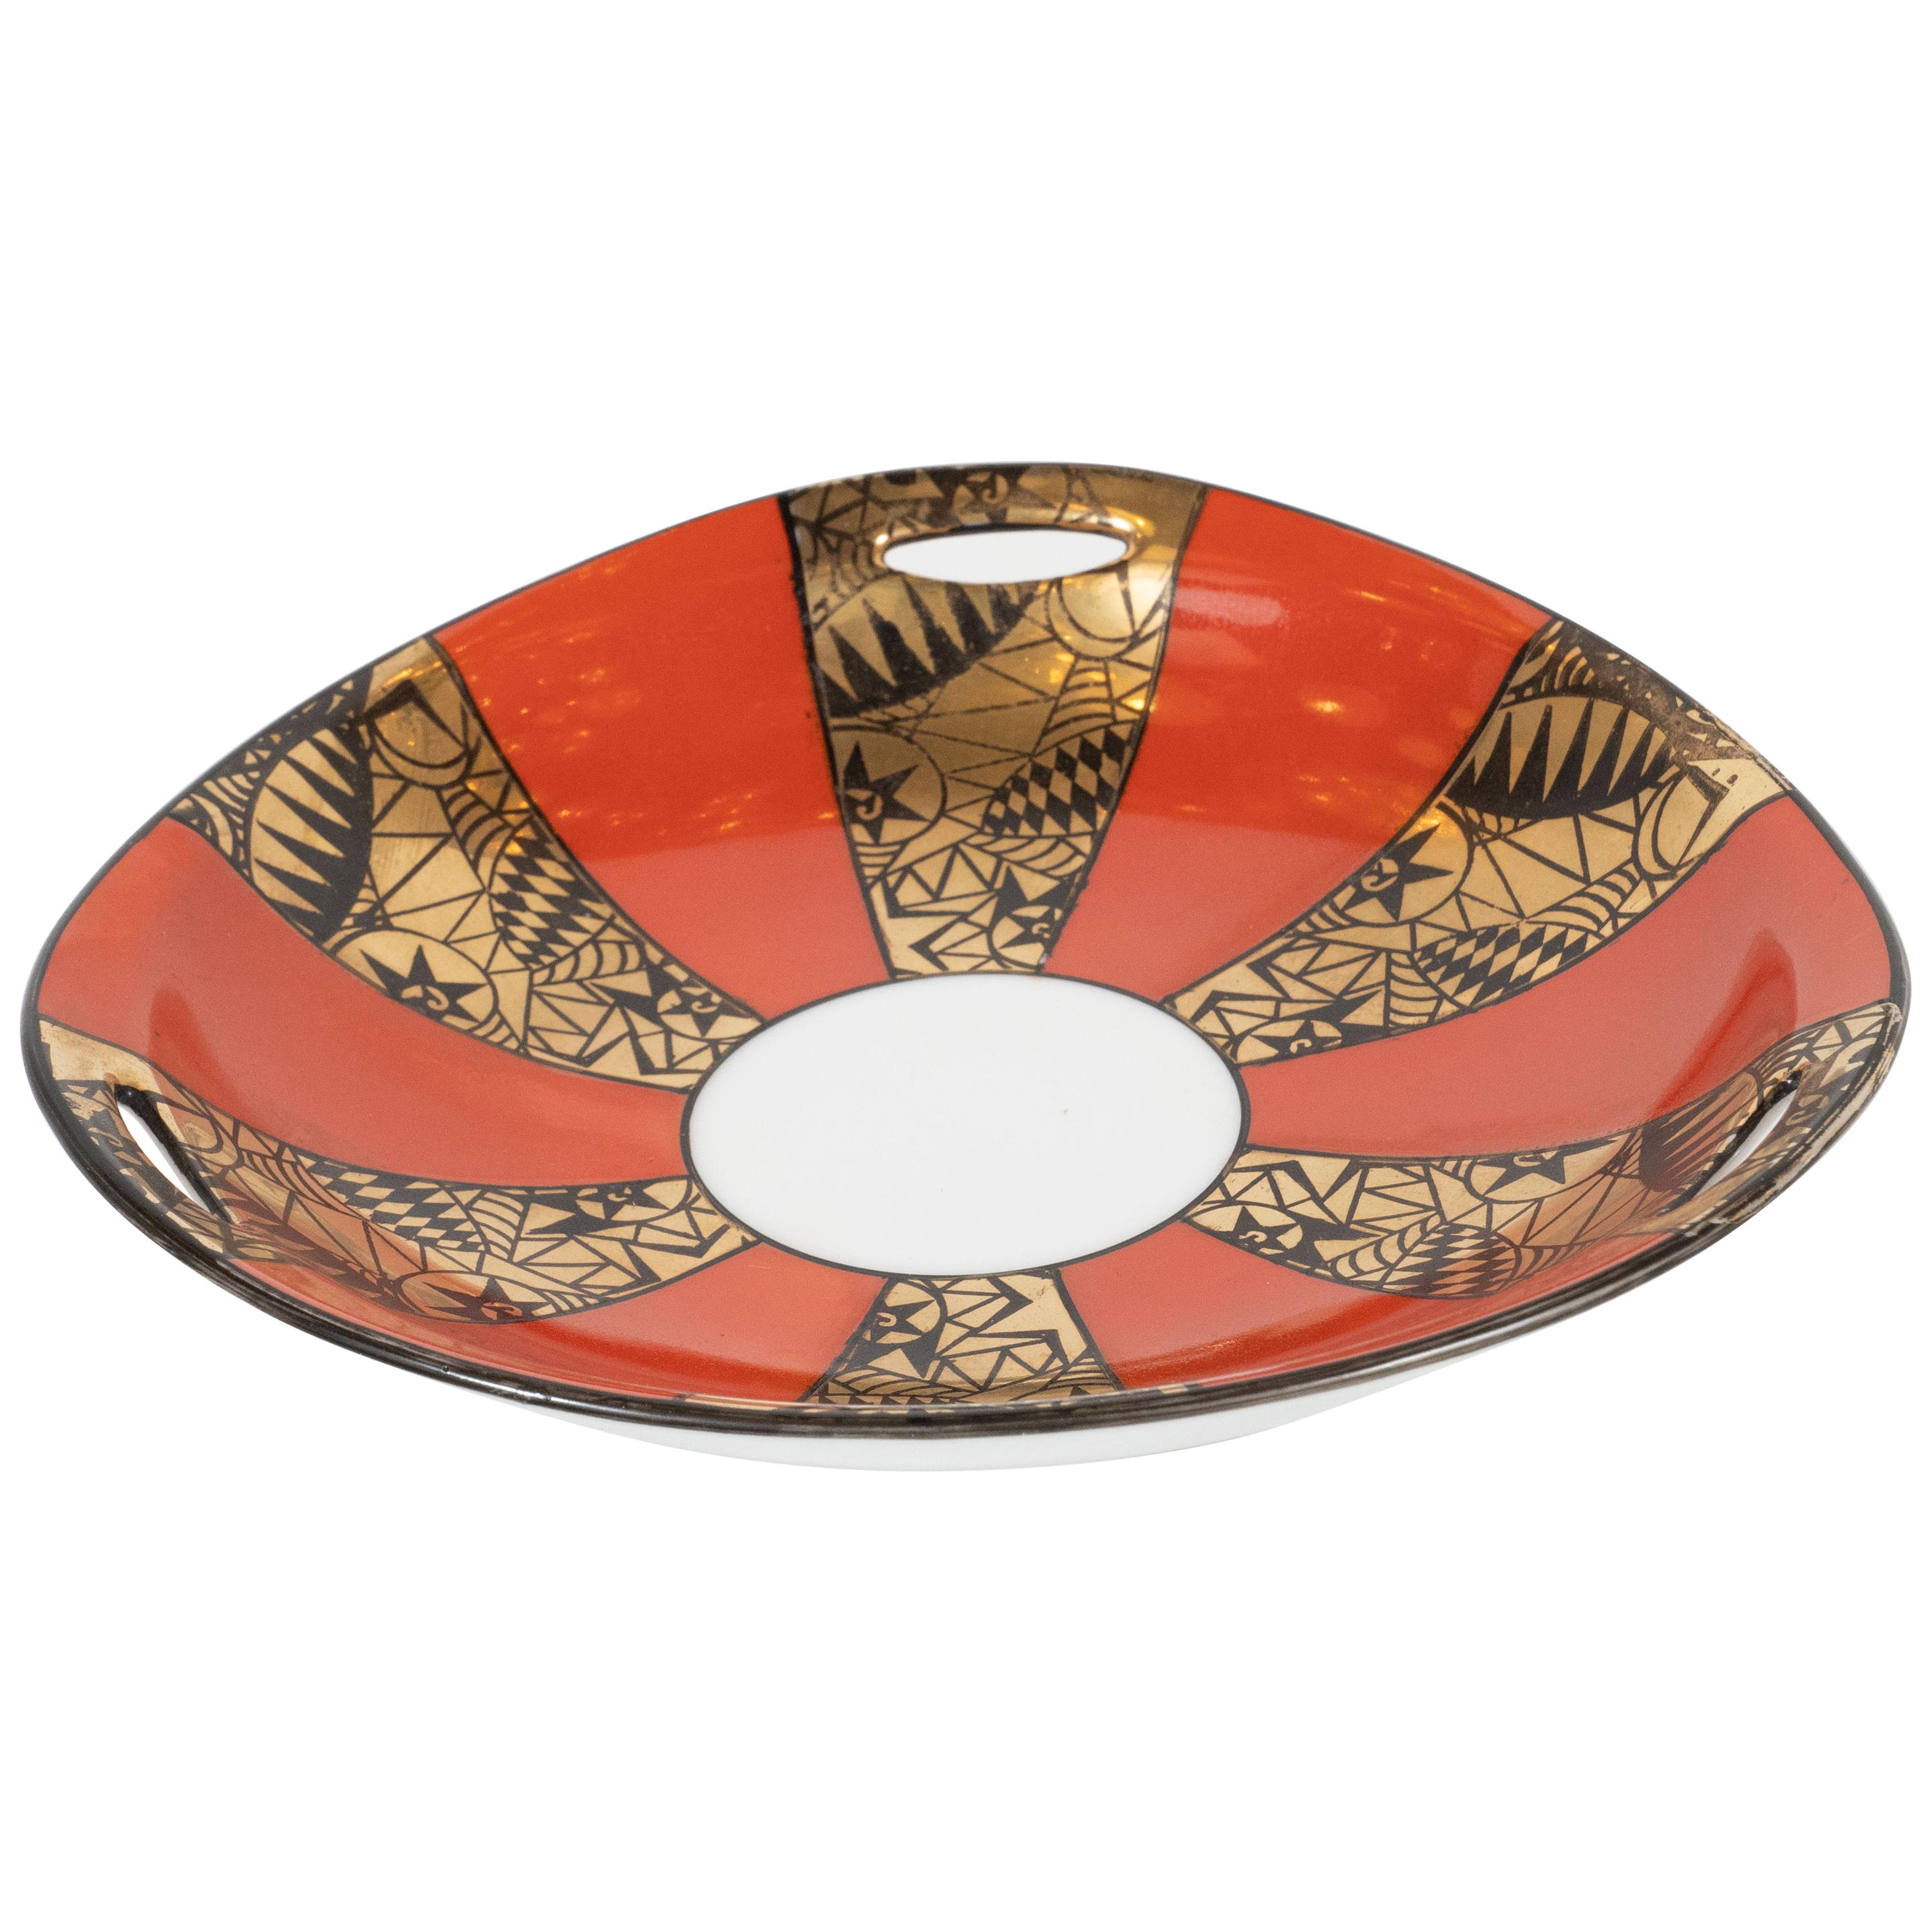 Art Deco Gold/Burnt Persimmon Porcelain Dish by Noritake with Cubist Detailing